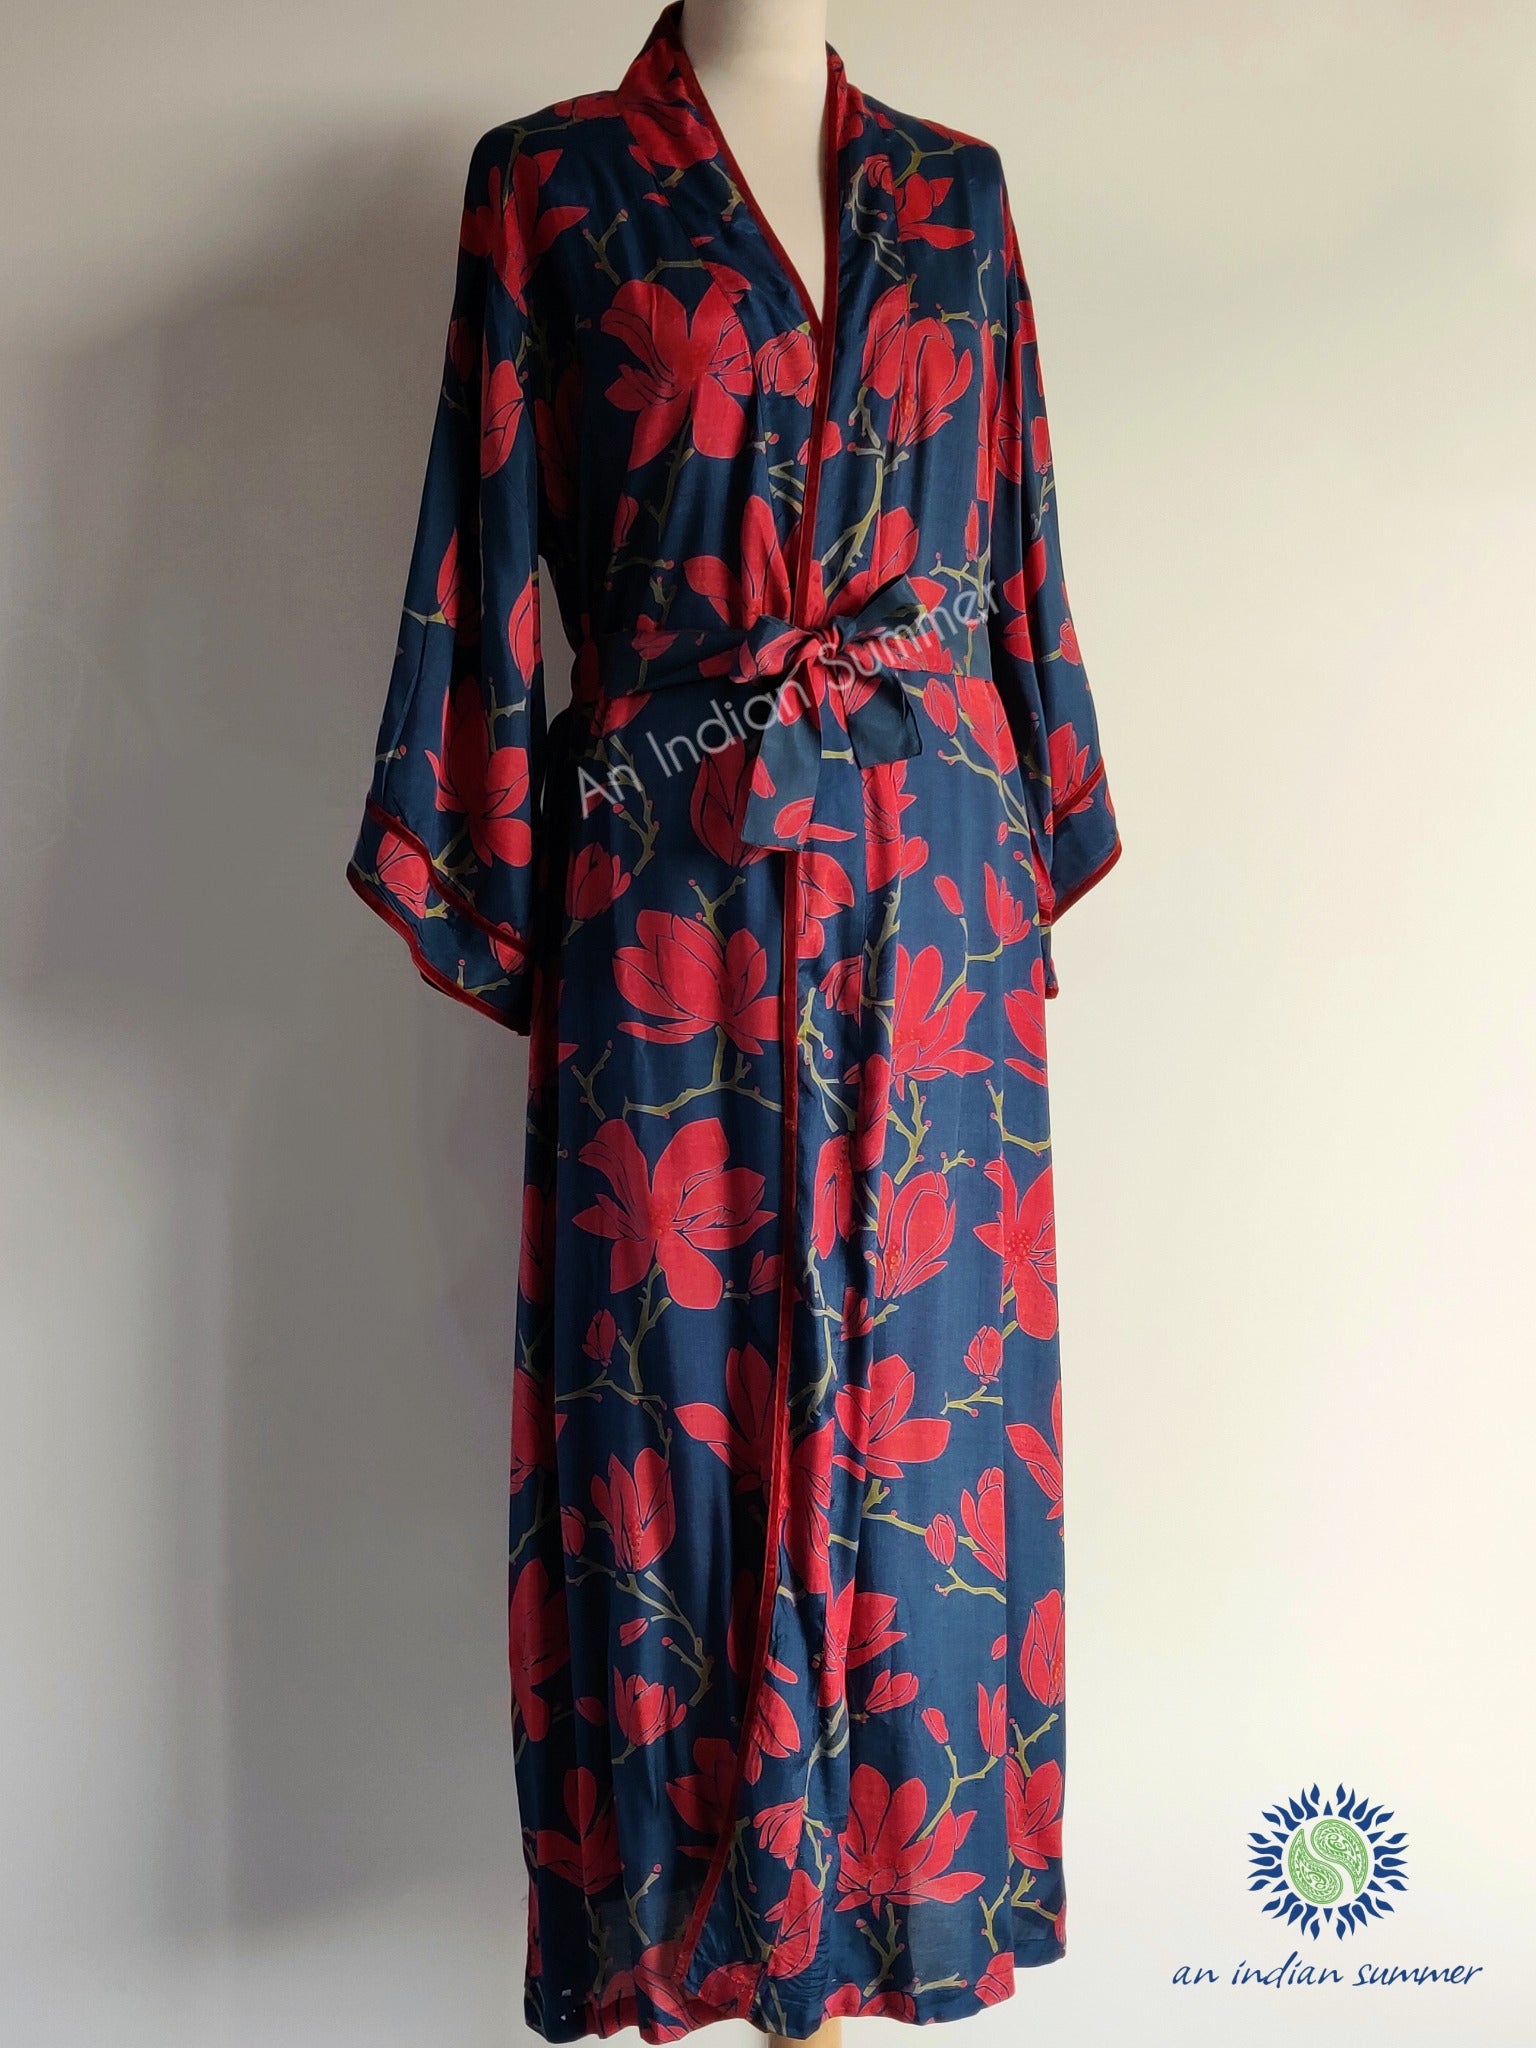 Magnolia Kimono Robe Wrap Dress | Teal and Red | Modal Velvet |An Indian Summer | Seasonless Timeless Sustainable Ethical Authentic Artisan Conscious Clothing Lifestyle Brand